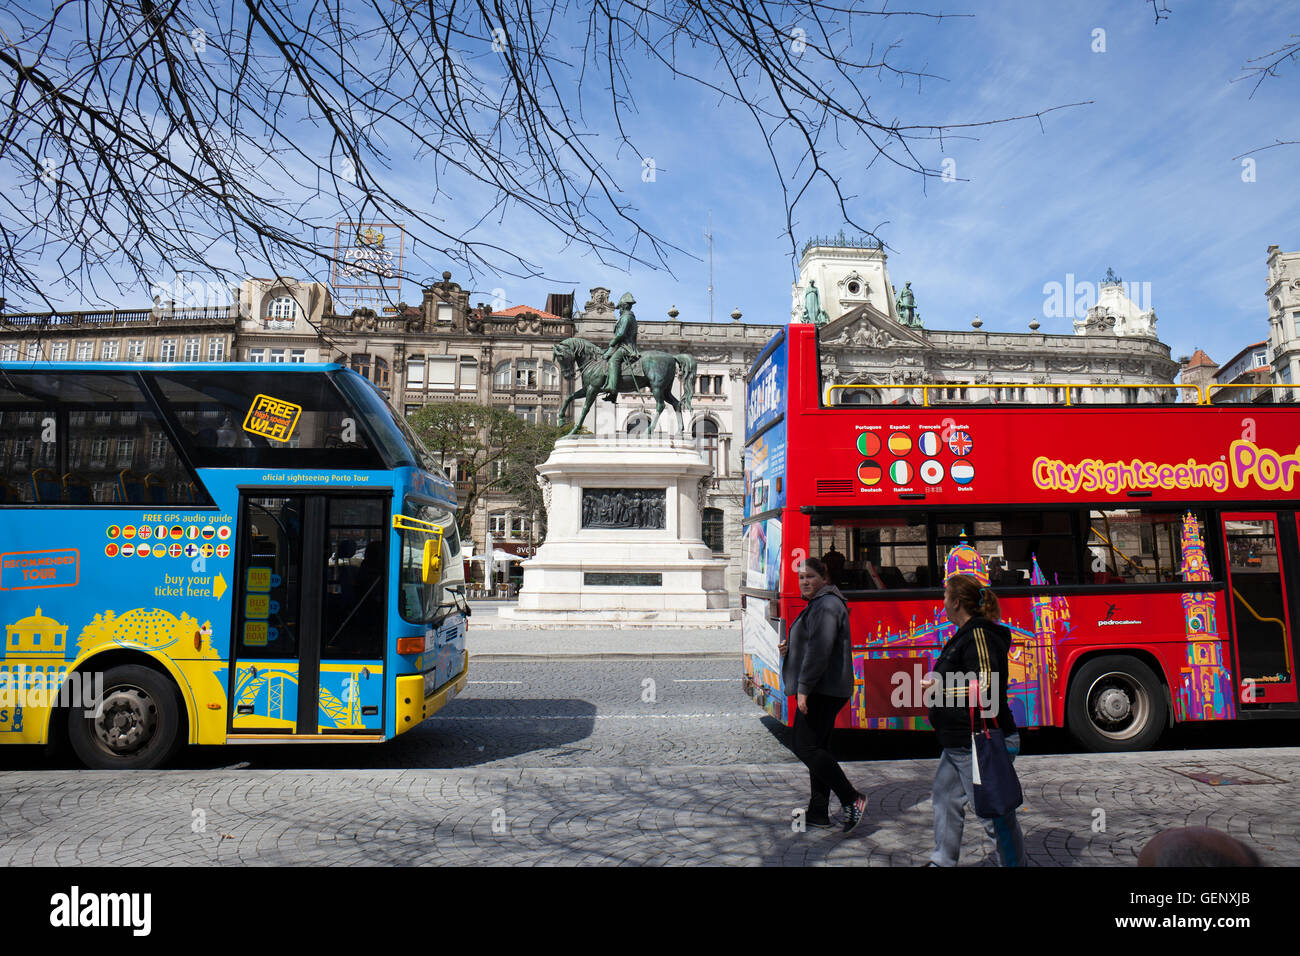 Porto, Portugal, hop-on hop-off city sightseeing tour buses at Praca Liberdade avenue in city centre, monument to King Pedro IV Stock Photo